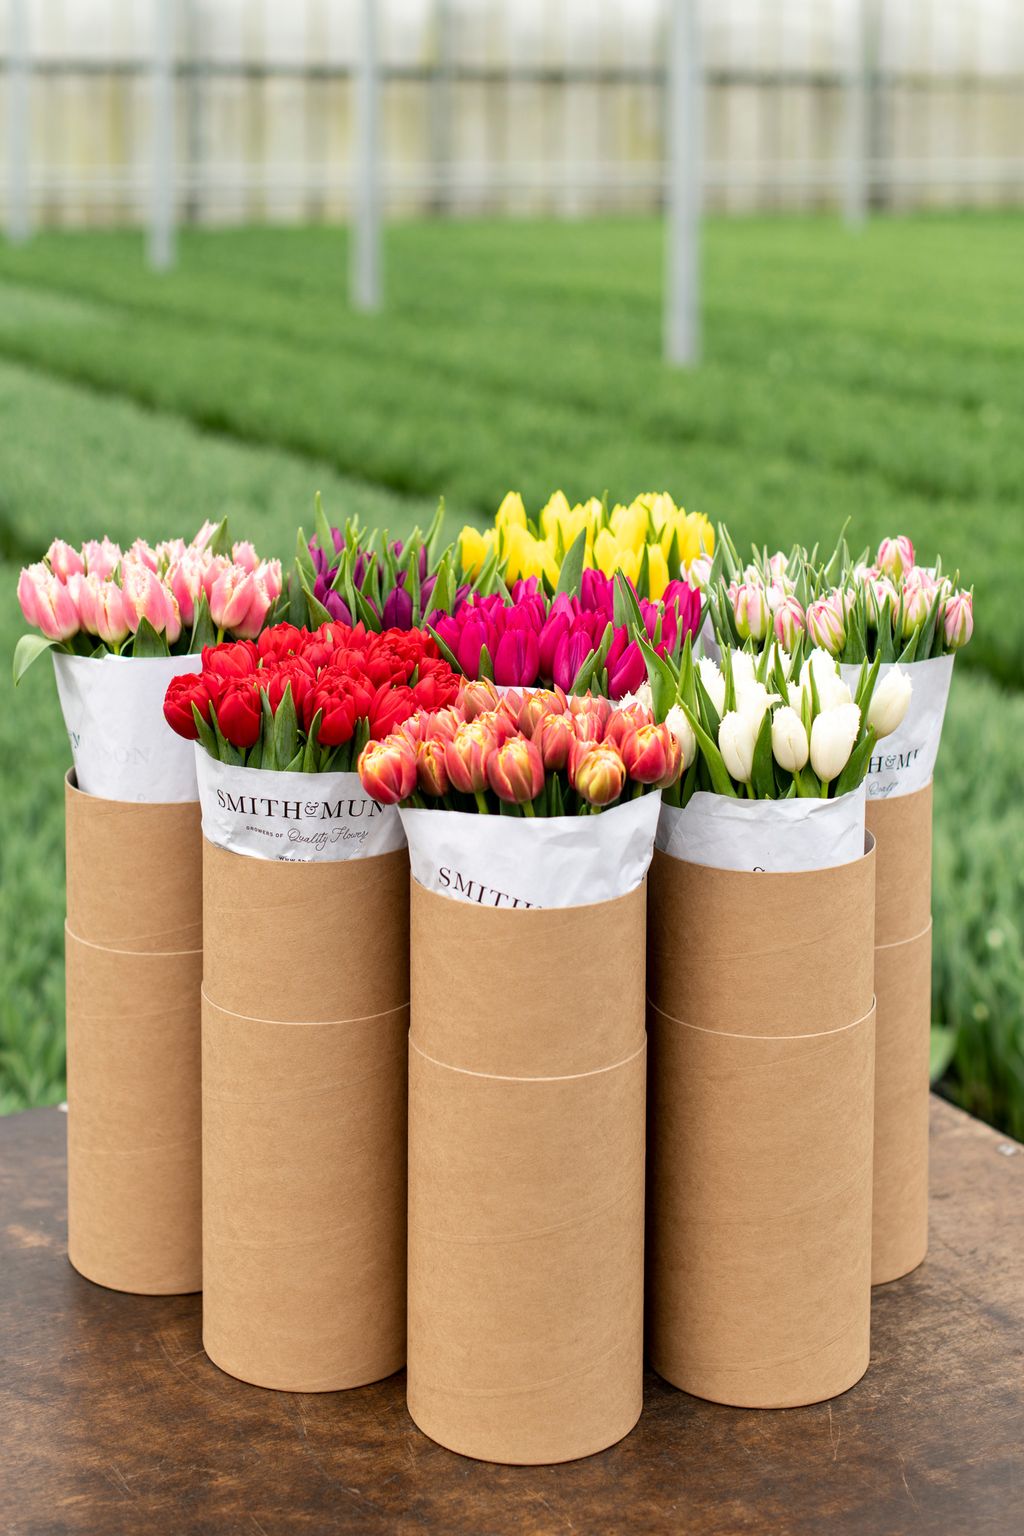 Smith & Munson | Flowers To Brighten Your Home